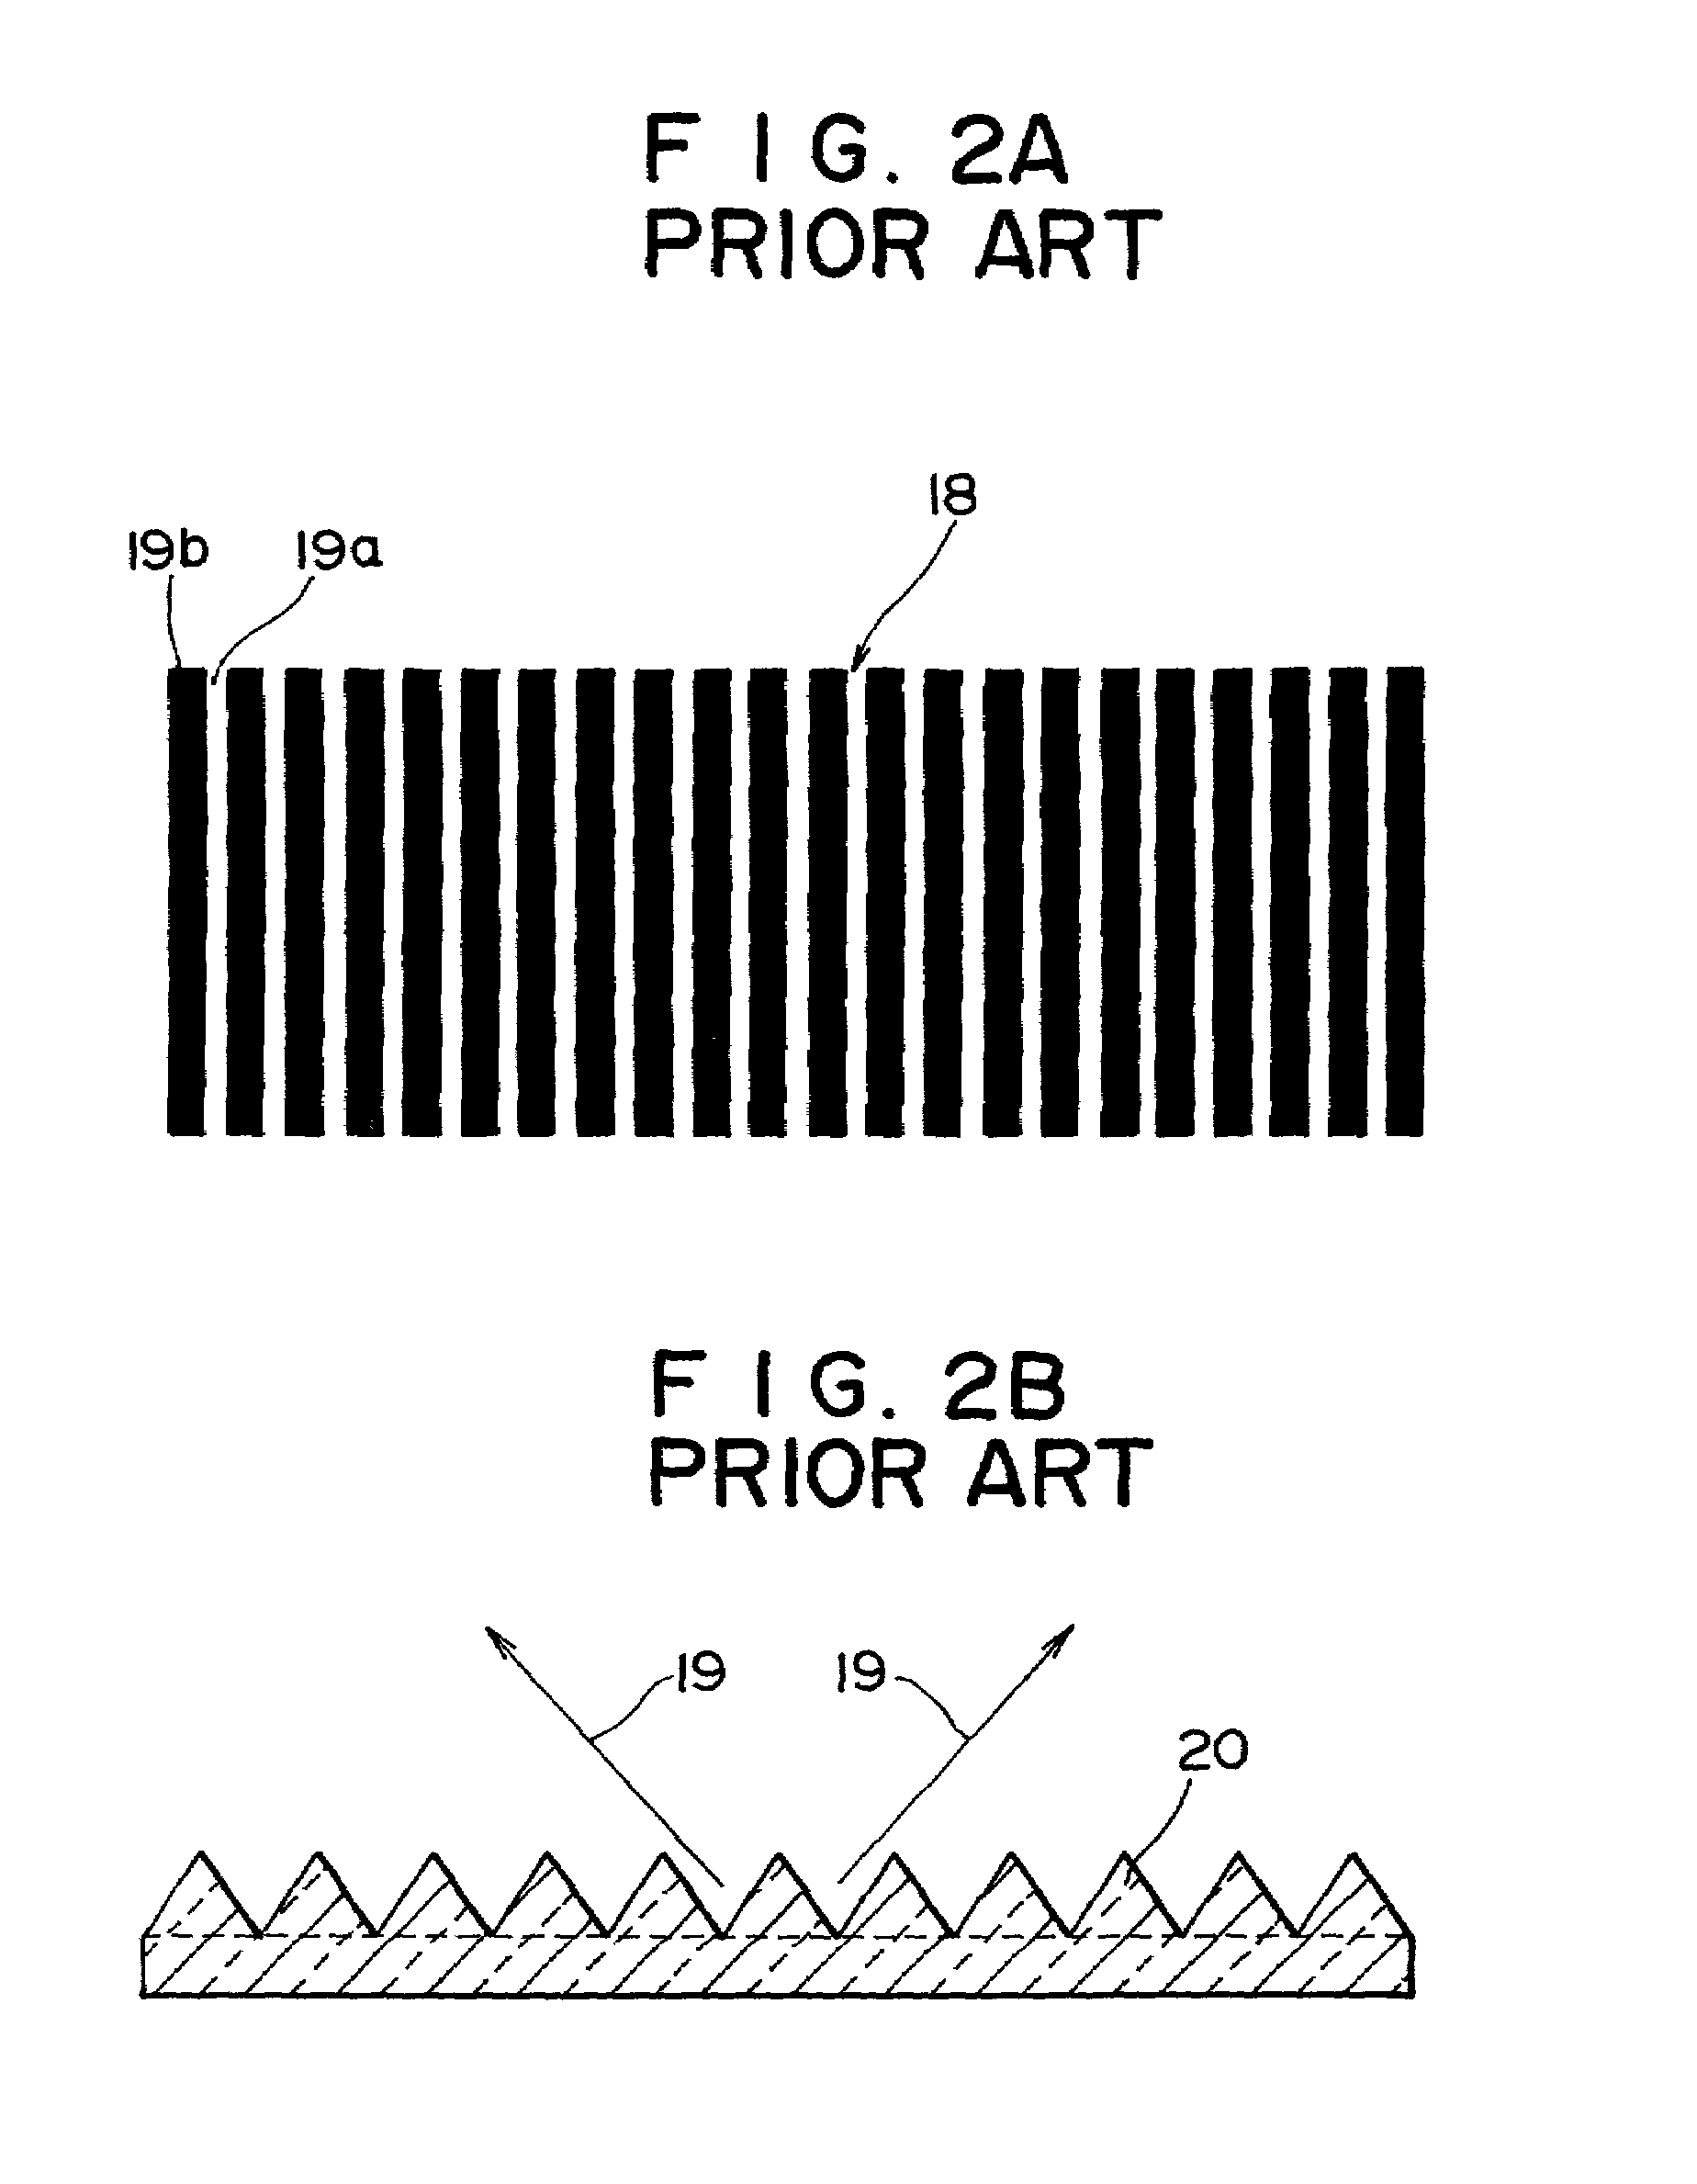 Liquid crystal display device with roughened surfaces to reduce moiré fringe effects